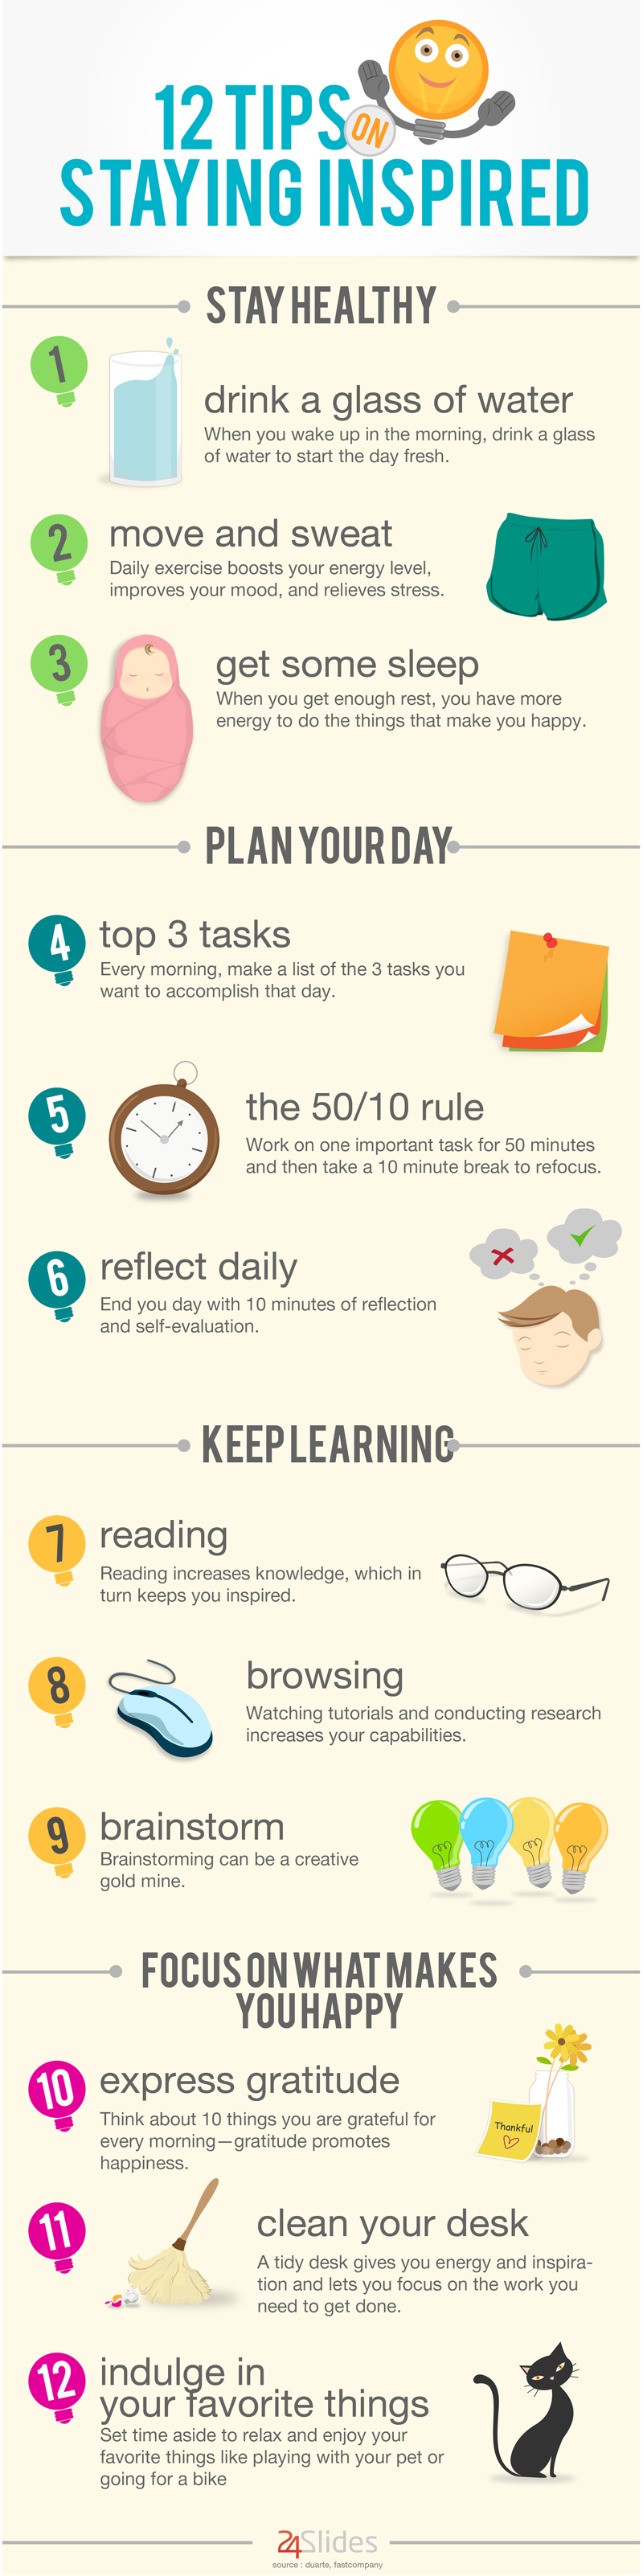 [INFOGRAPHIC] 12 Tips On Staying Inspired - An Infographic from 24Slides Blog